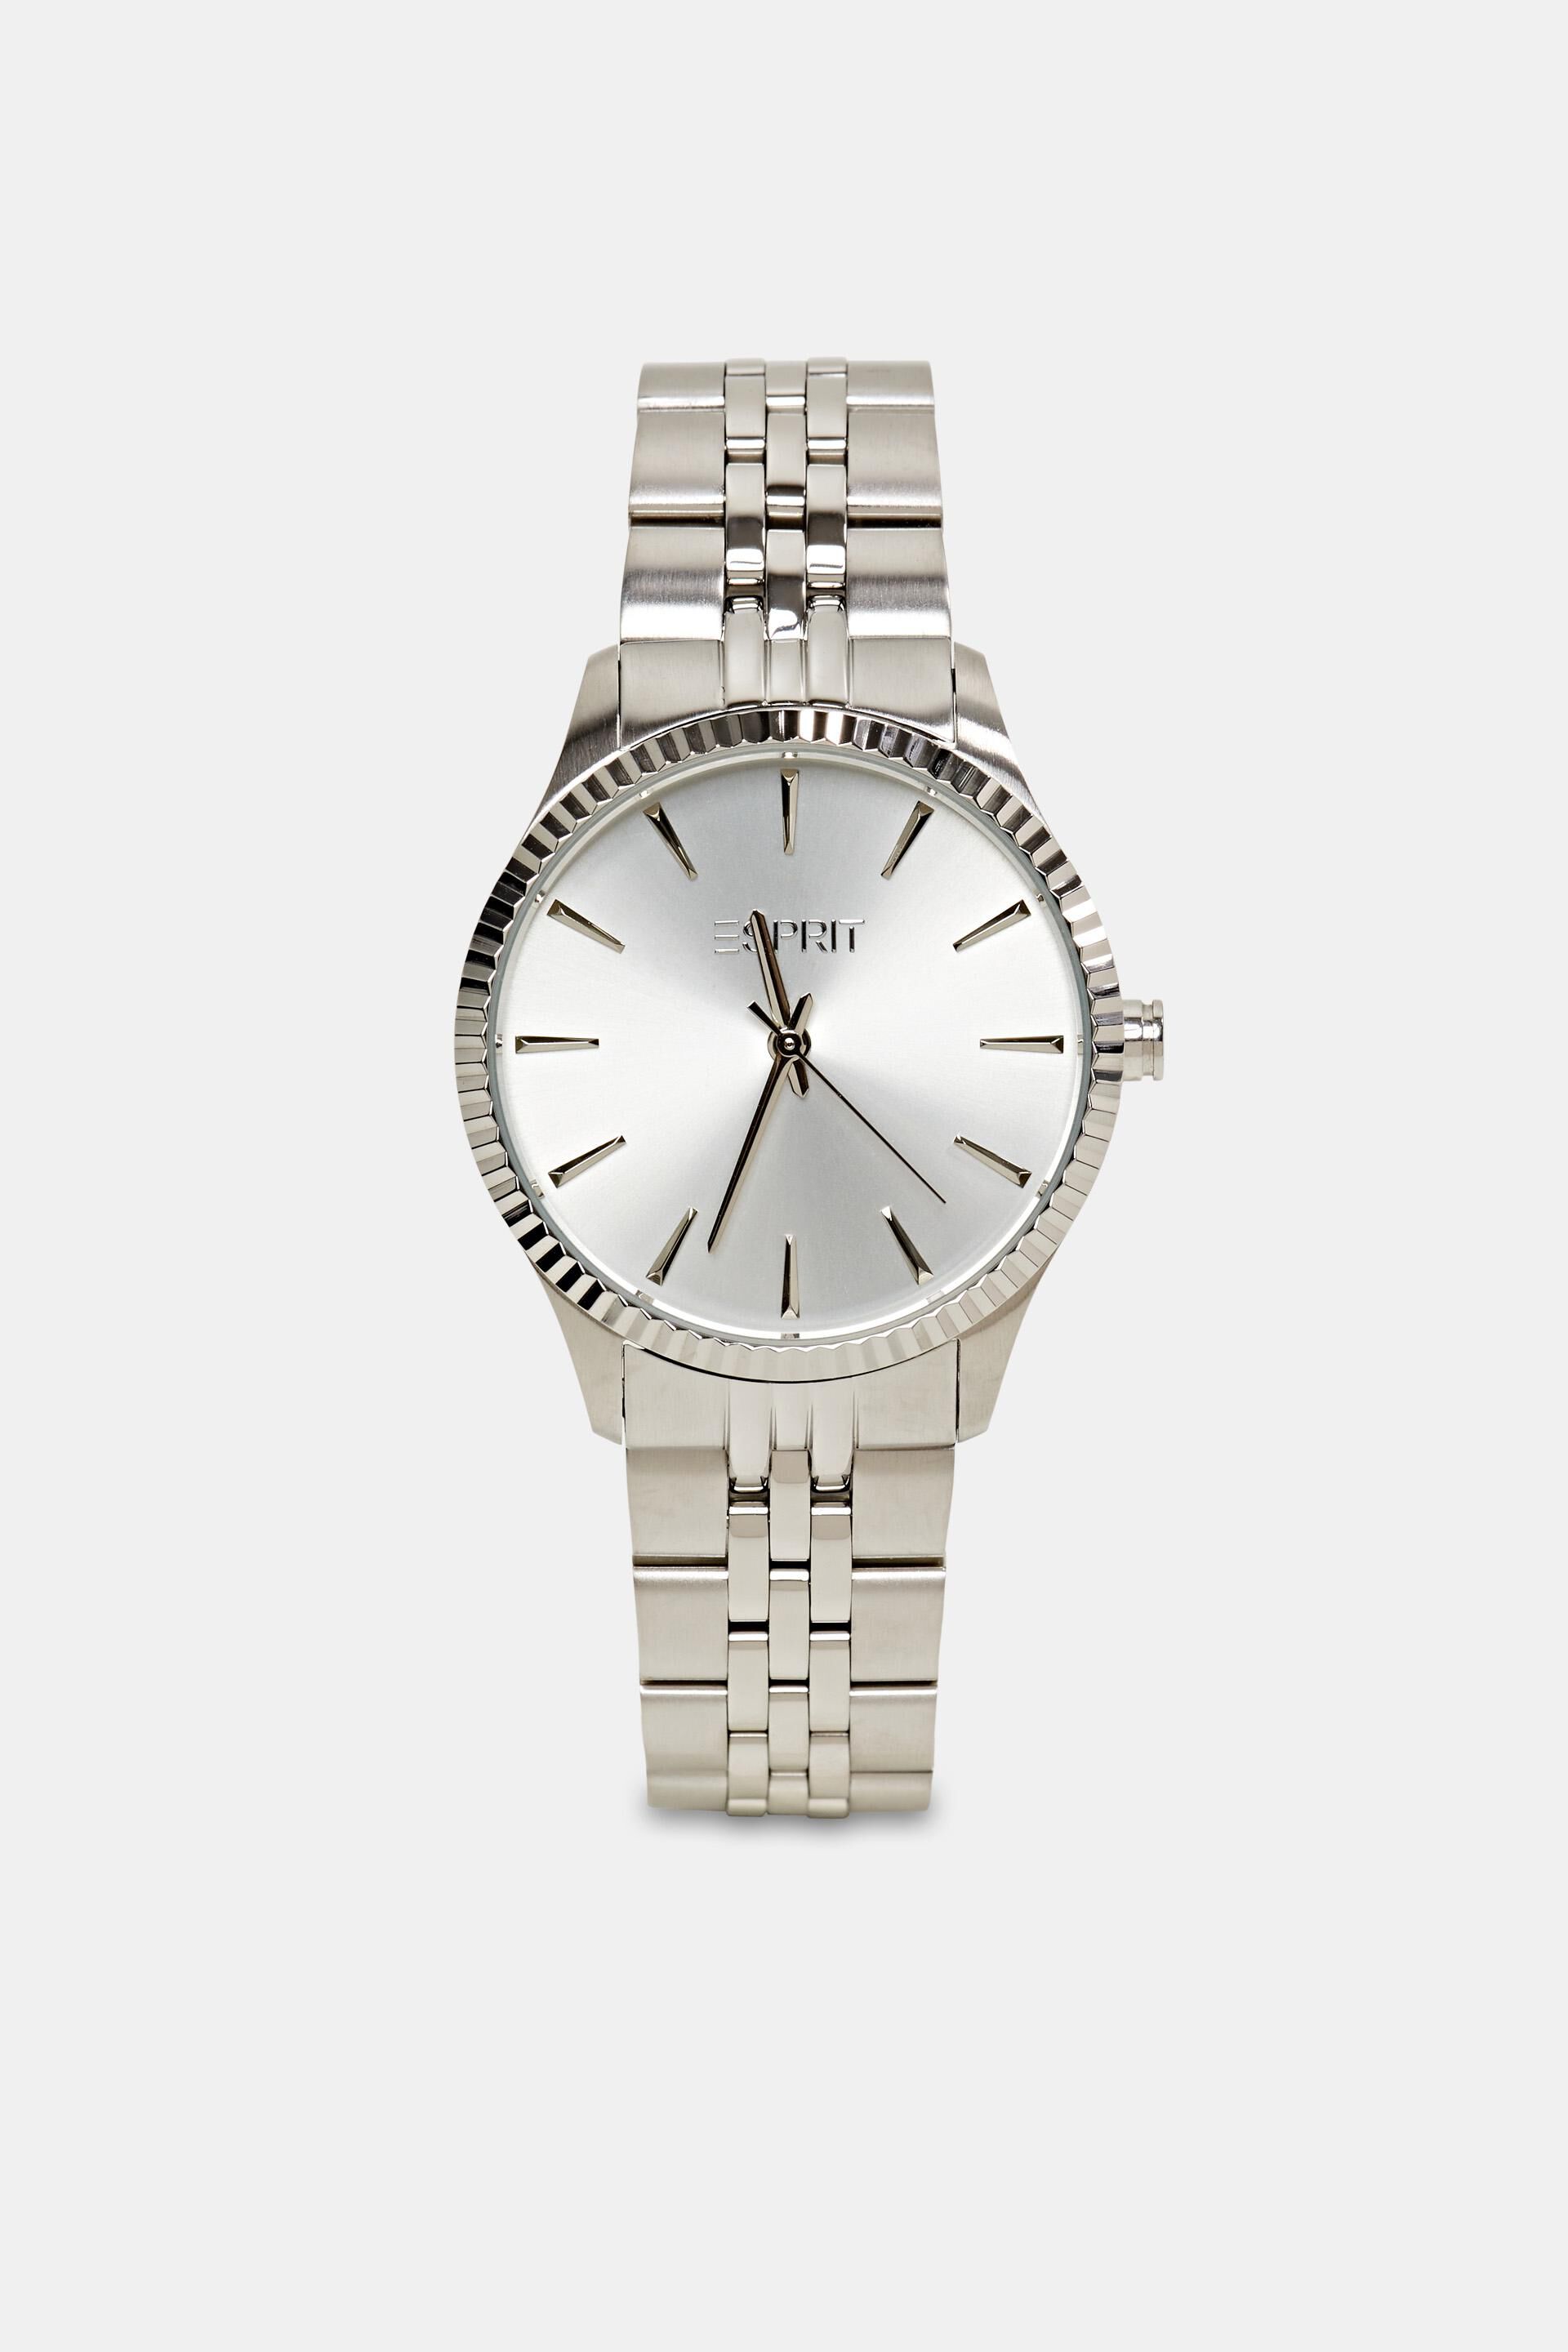 Esprit Online Store Stainless steel watch with a corrugated bezel